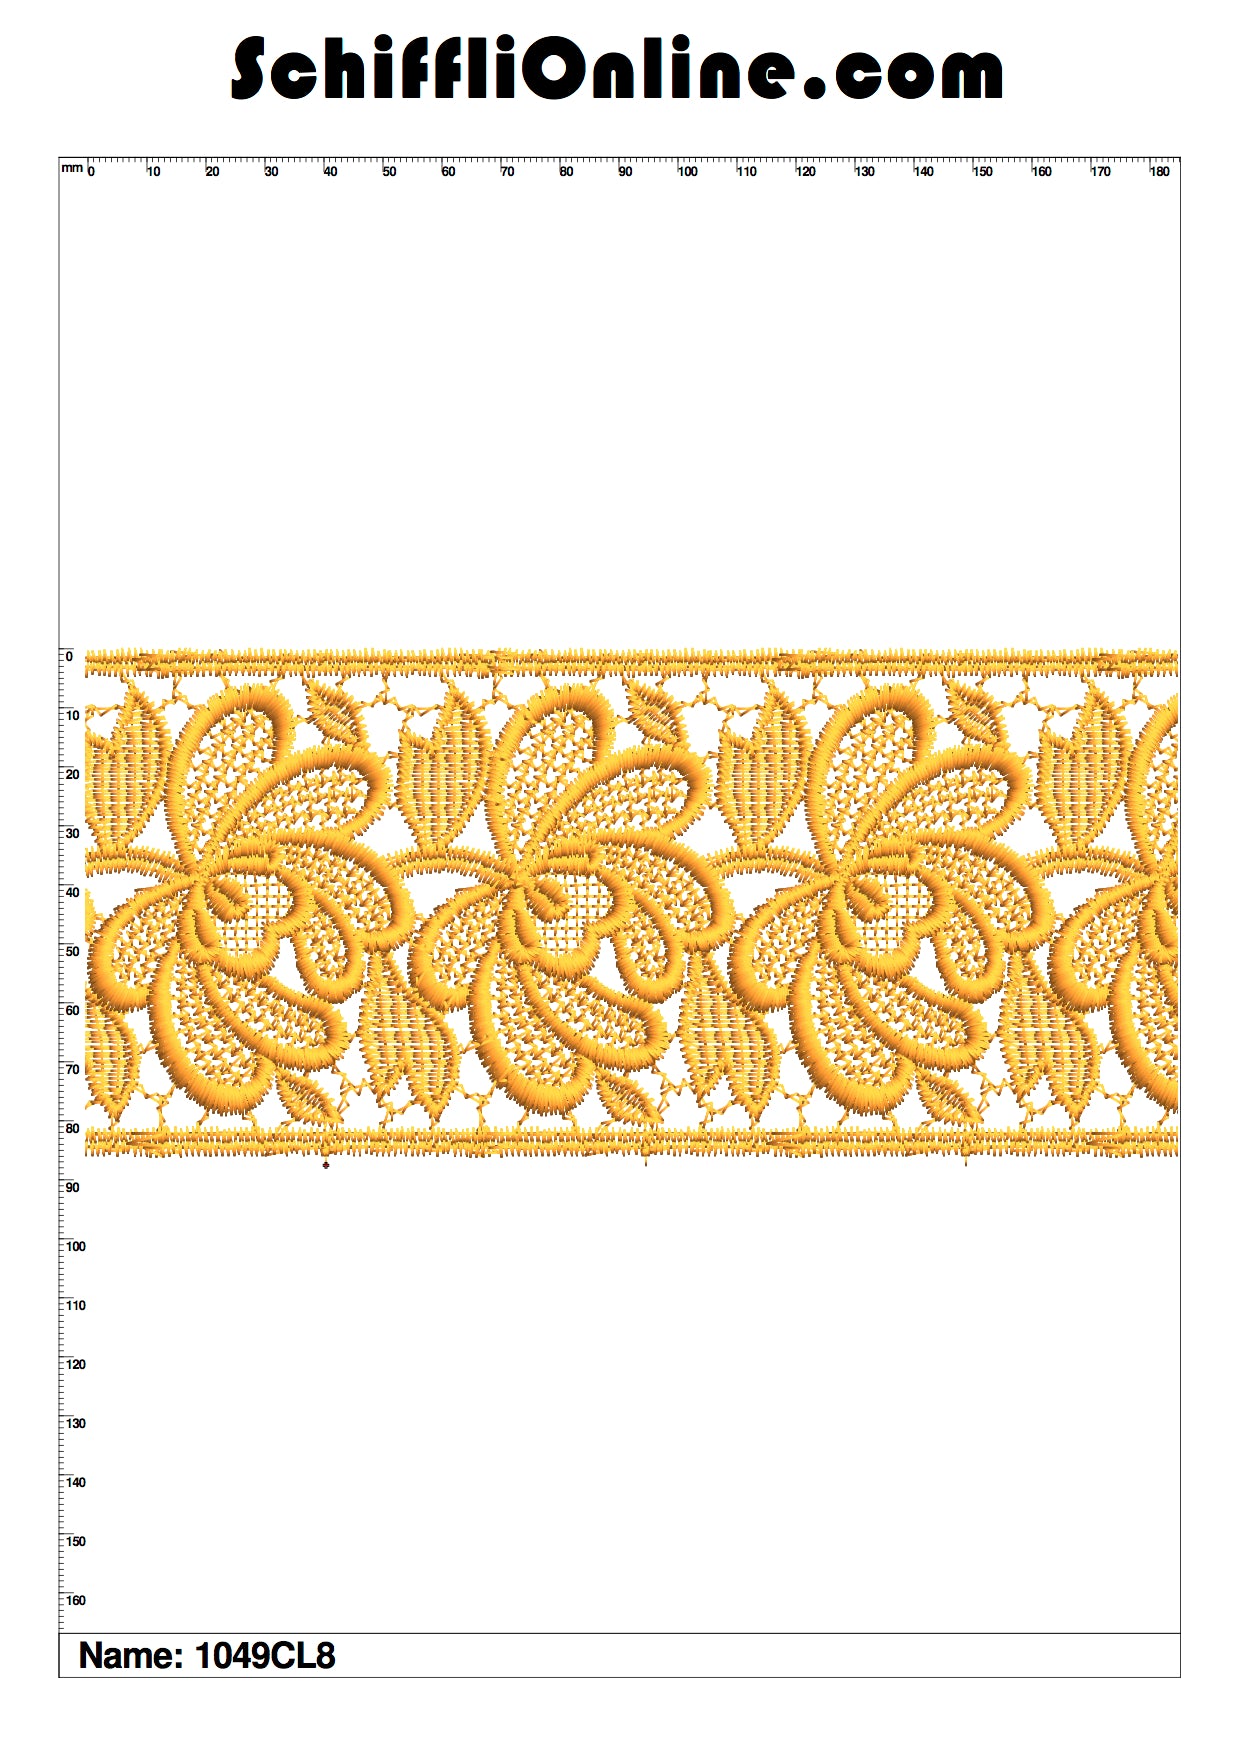 Book 132 CHEMICAL LACE 8X4 50 DESIGNS